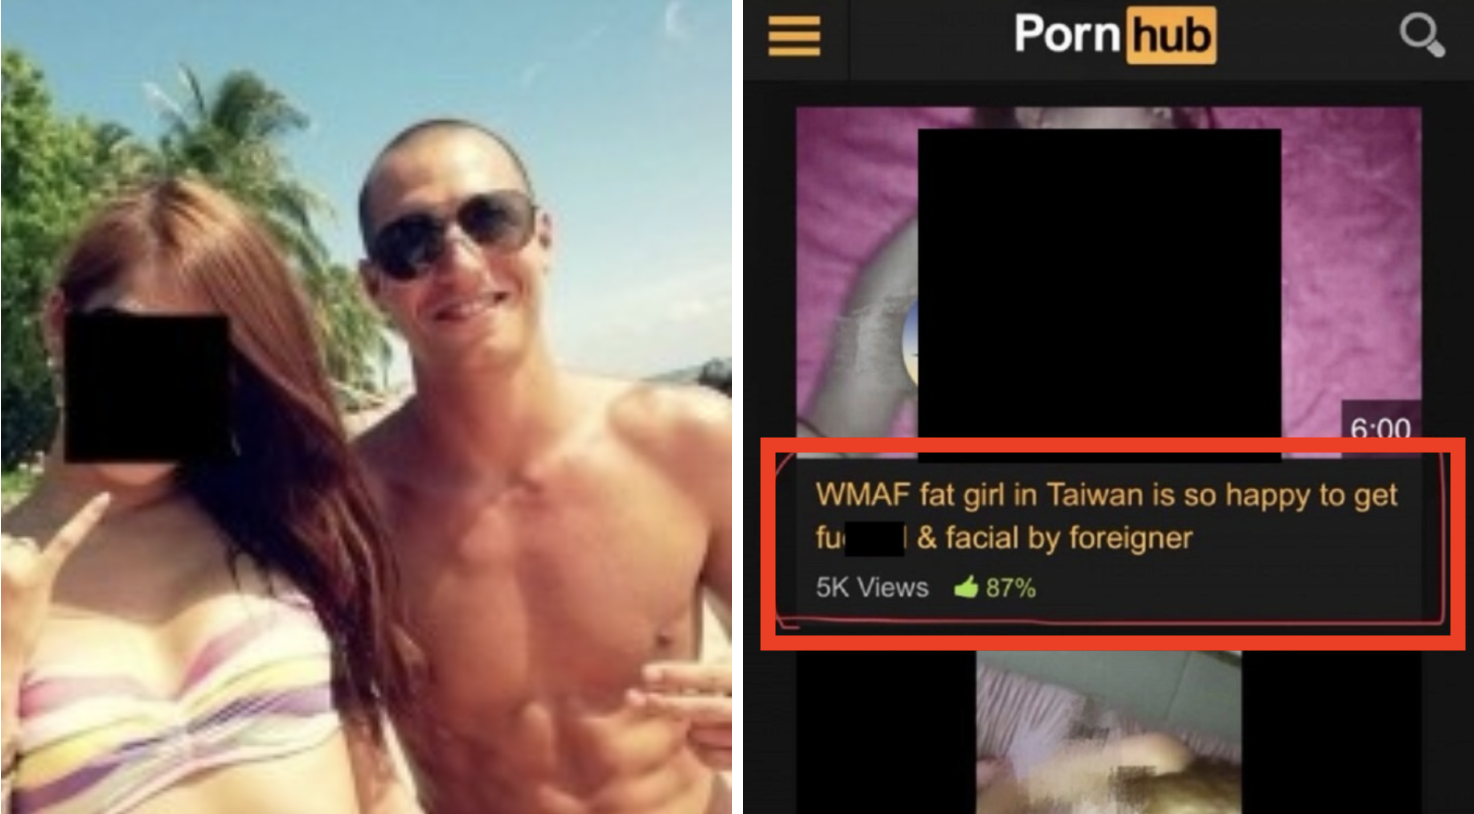 MMA Fighter Who Secretly Films Sex With Asian Women Now Back on Pornhub Selling Videos image